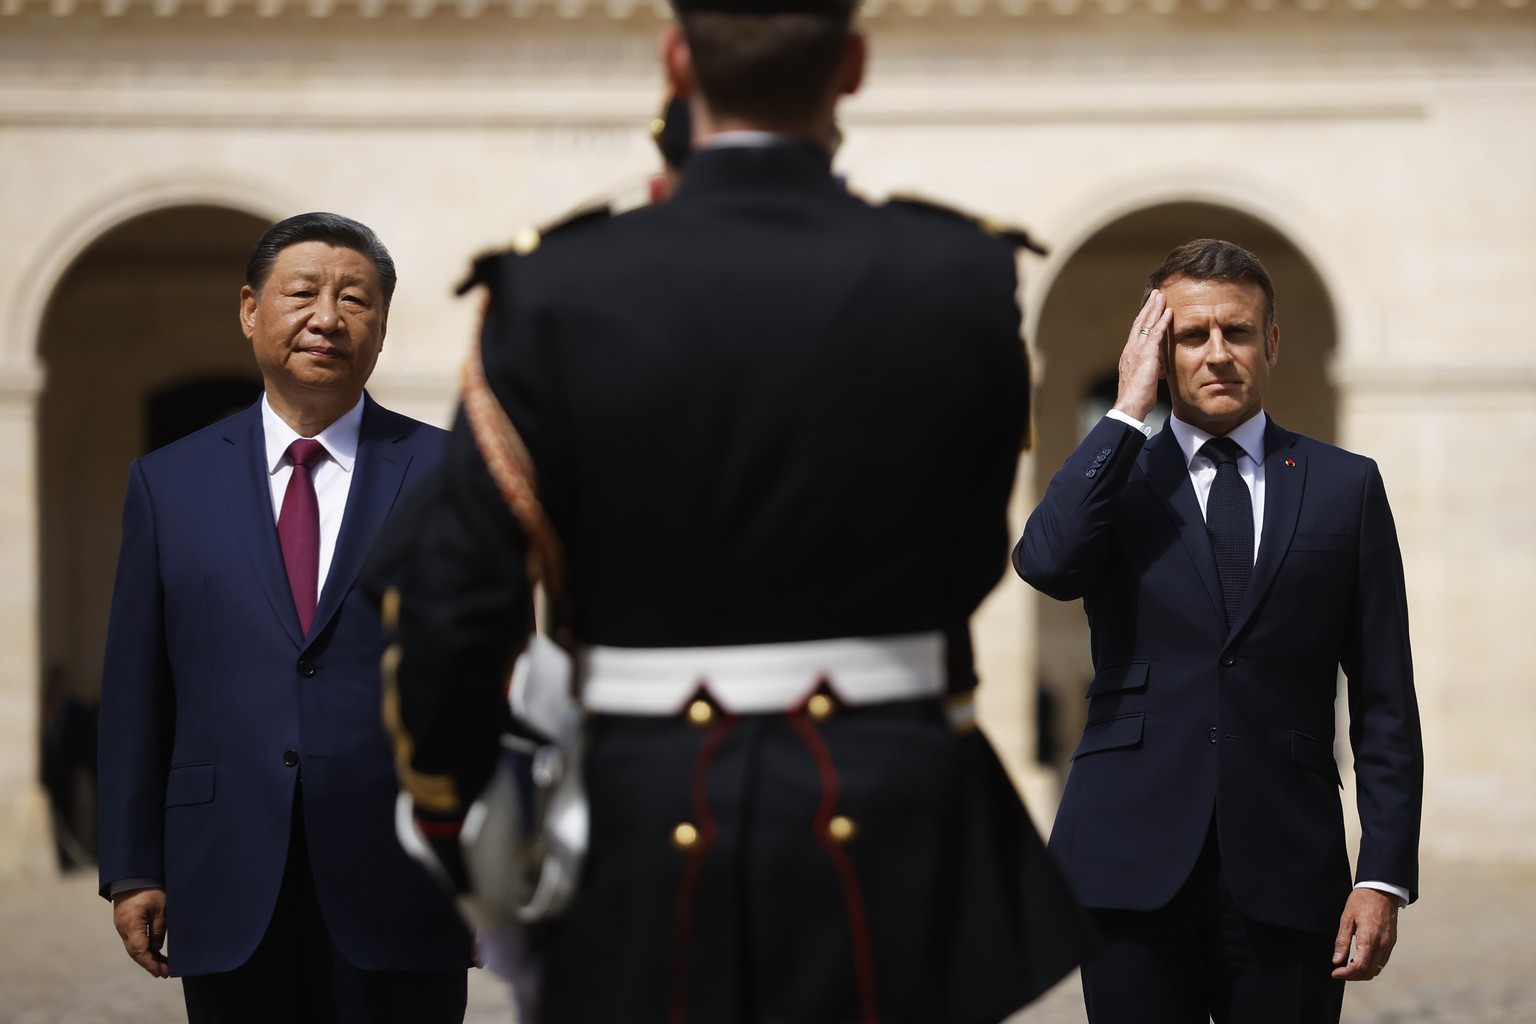 French President Emmanuel Macron and Chinese President Xi Jinping stand in front of the Republican Guards during the official welcoming ceremony at the Hotel national des Invalides in Paris, Monday, M ...